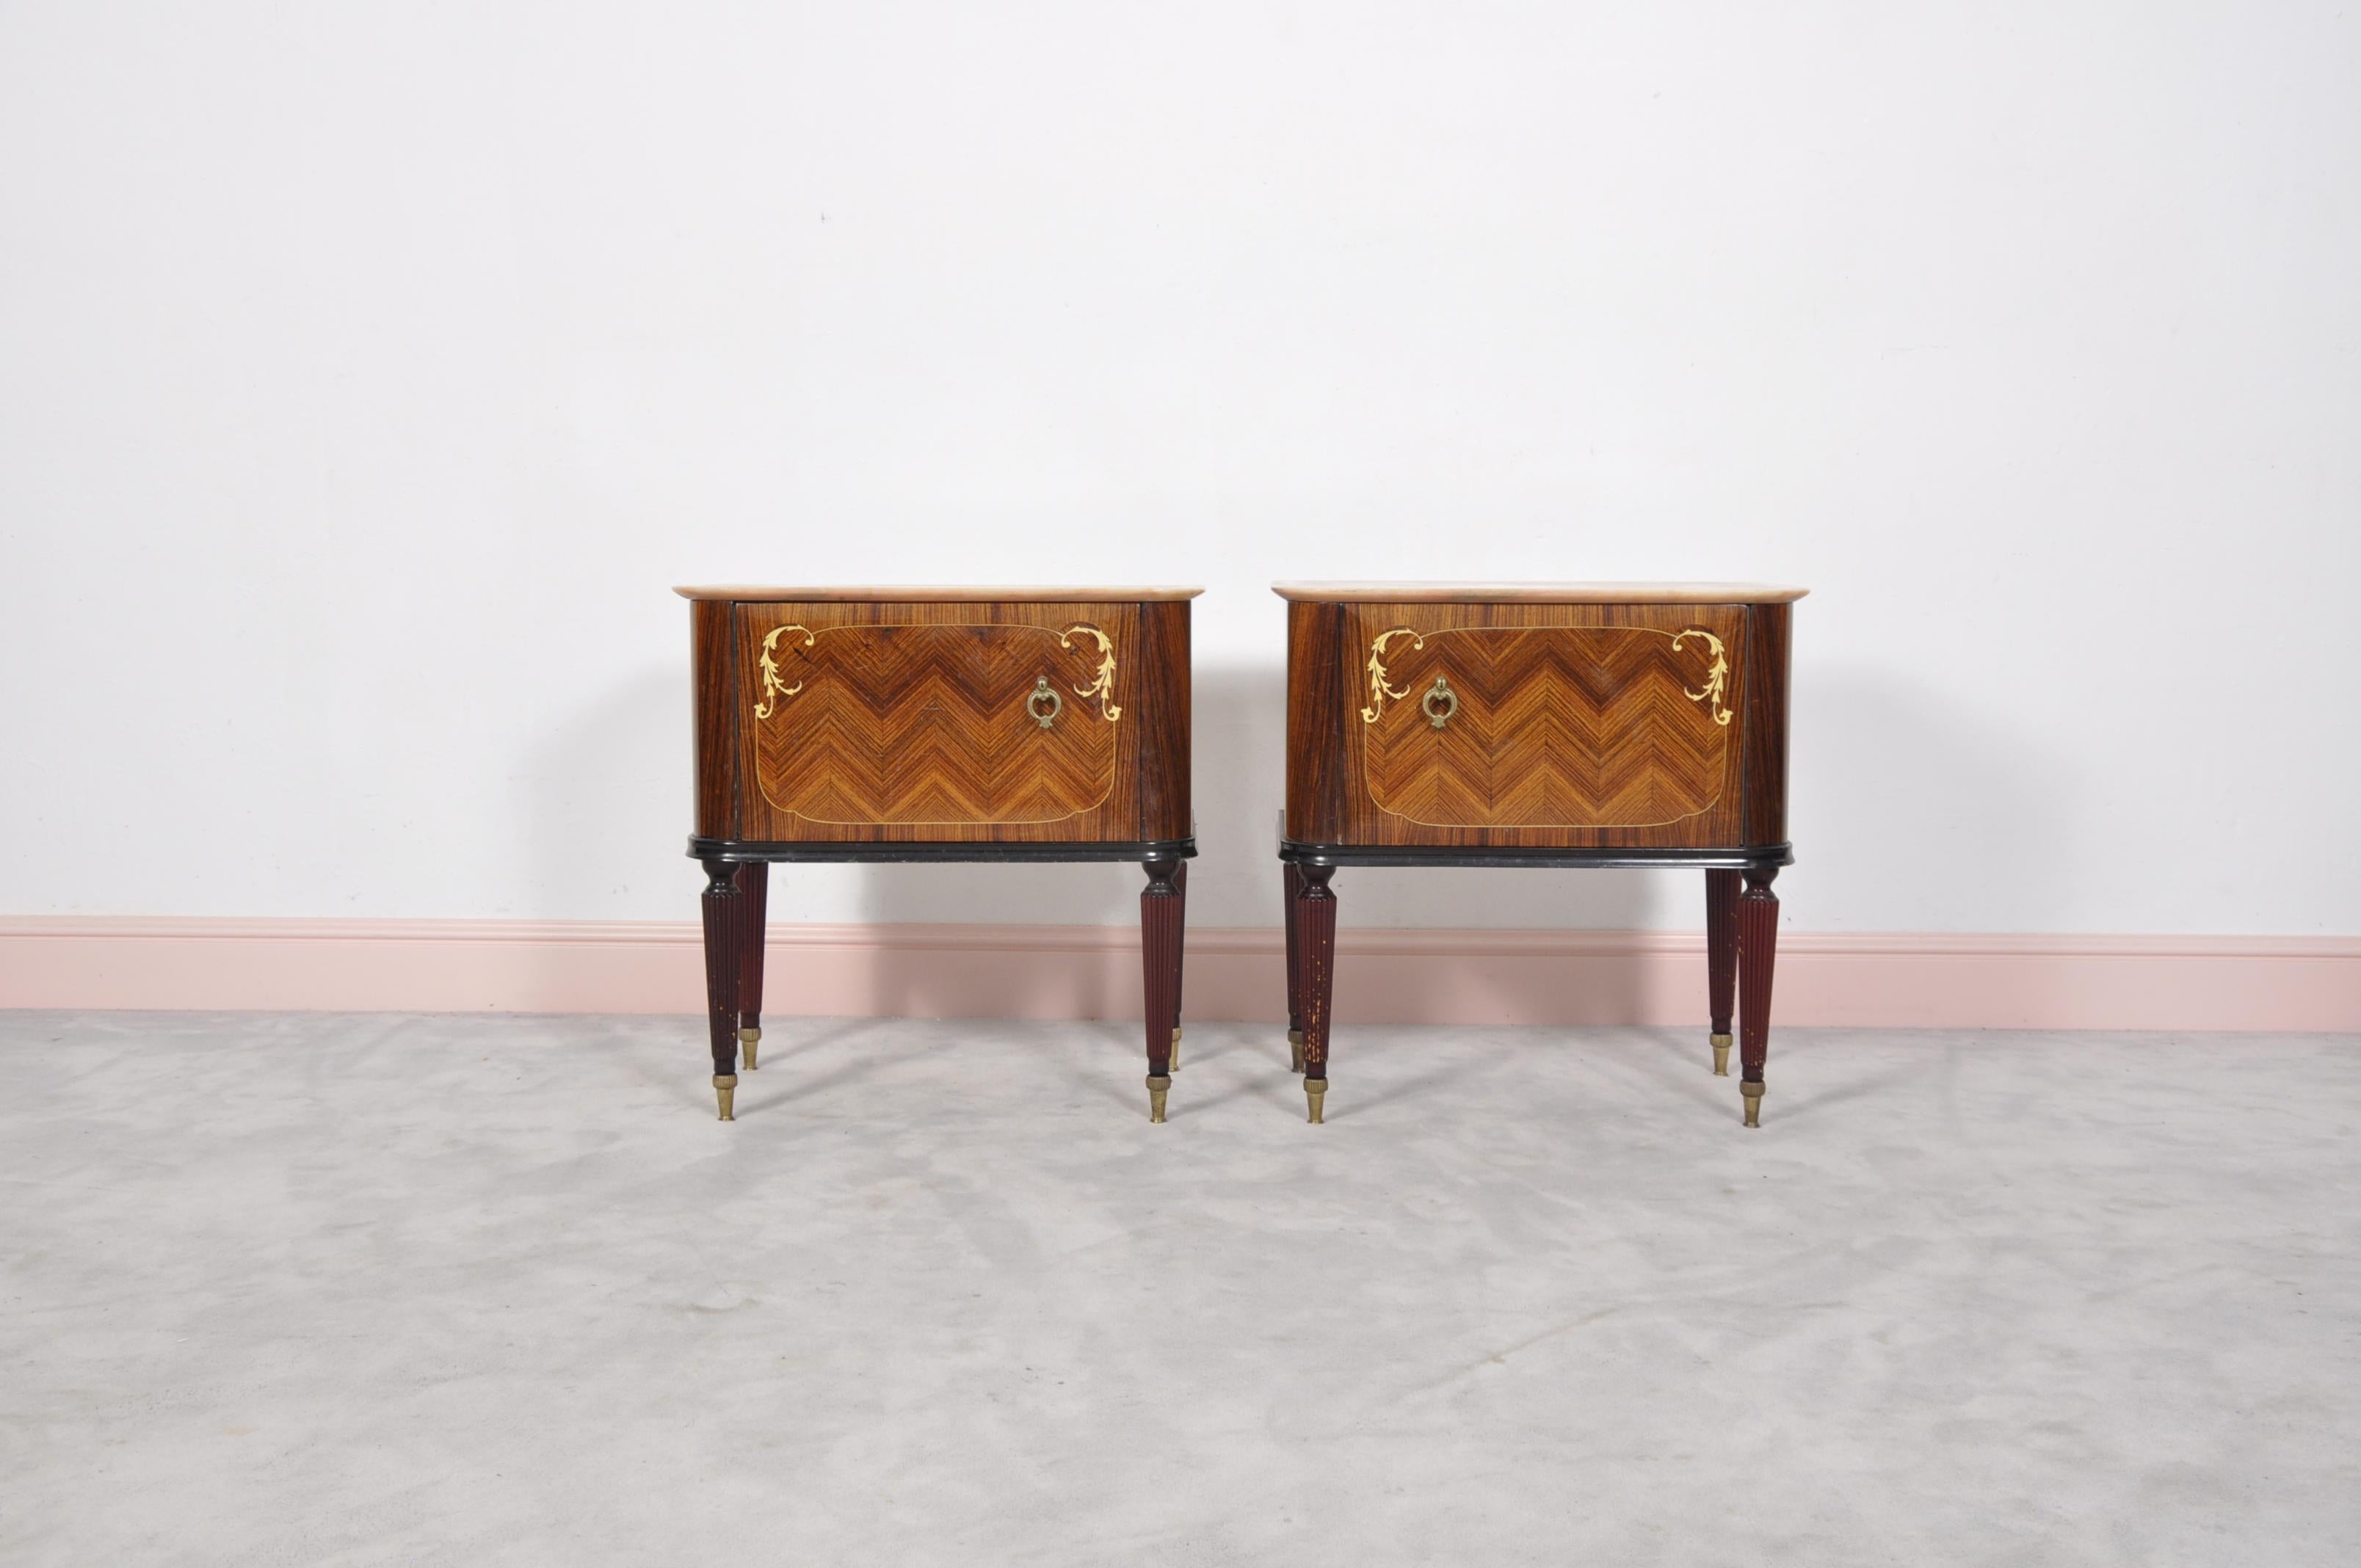 A set of two beautifully carved nightstands or side tables executed in fine rosewood. The marble tops perfeclty fit with the wood. The leg ends are finished with lightly patinated copper sabots. The size is typical, considering that nightstands are